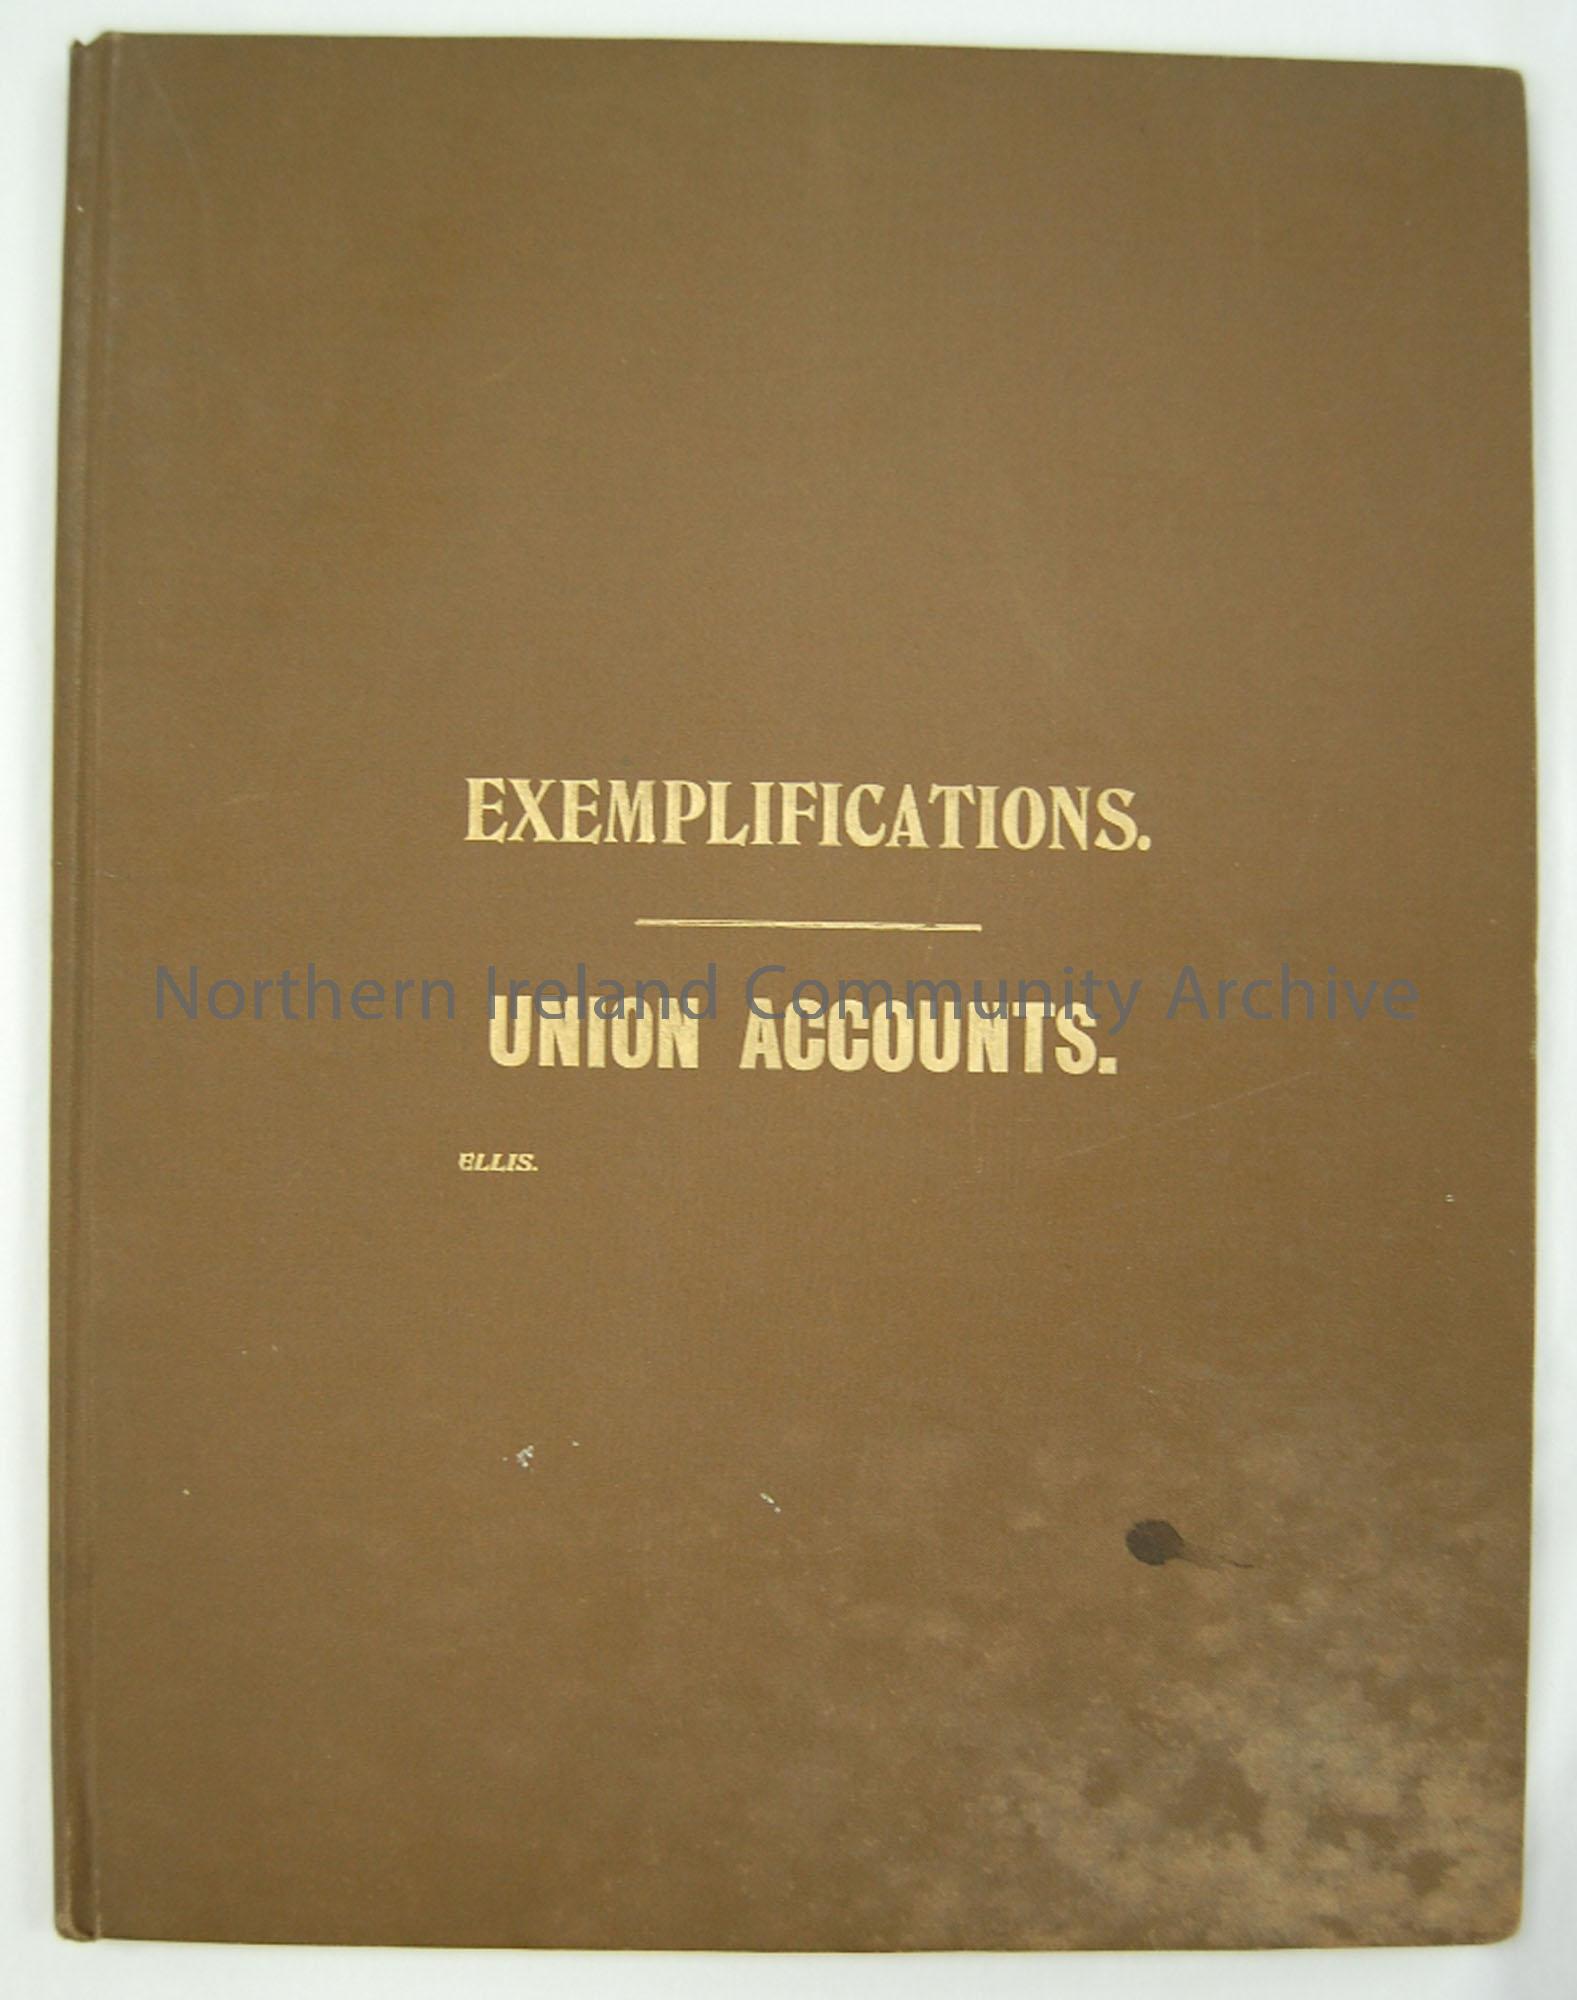 Exemplifications. Union Accounts. 1899